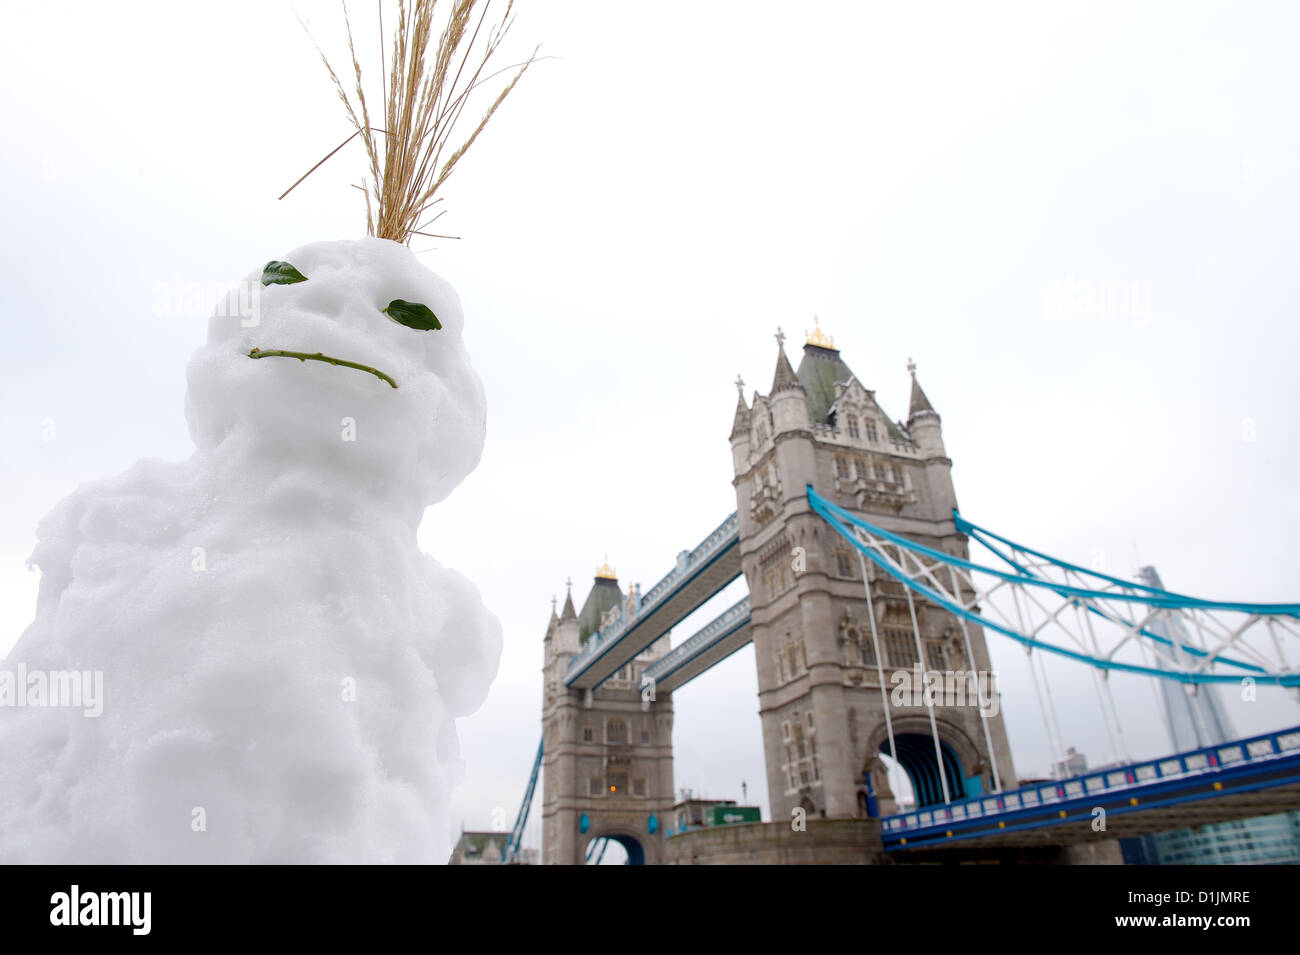 Snowman with Tower Bridge and the Shard building in the background, London Borough of Tower Hamlets, East London, England, UK Stock Photo